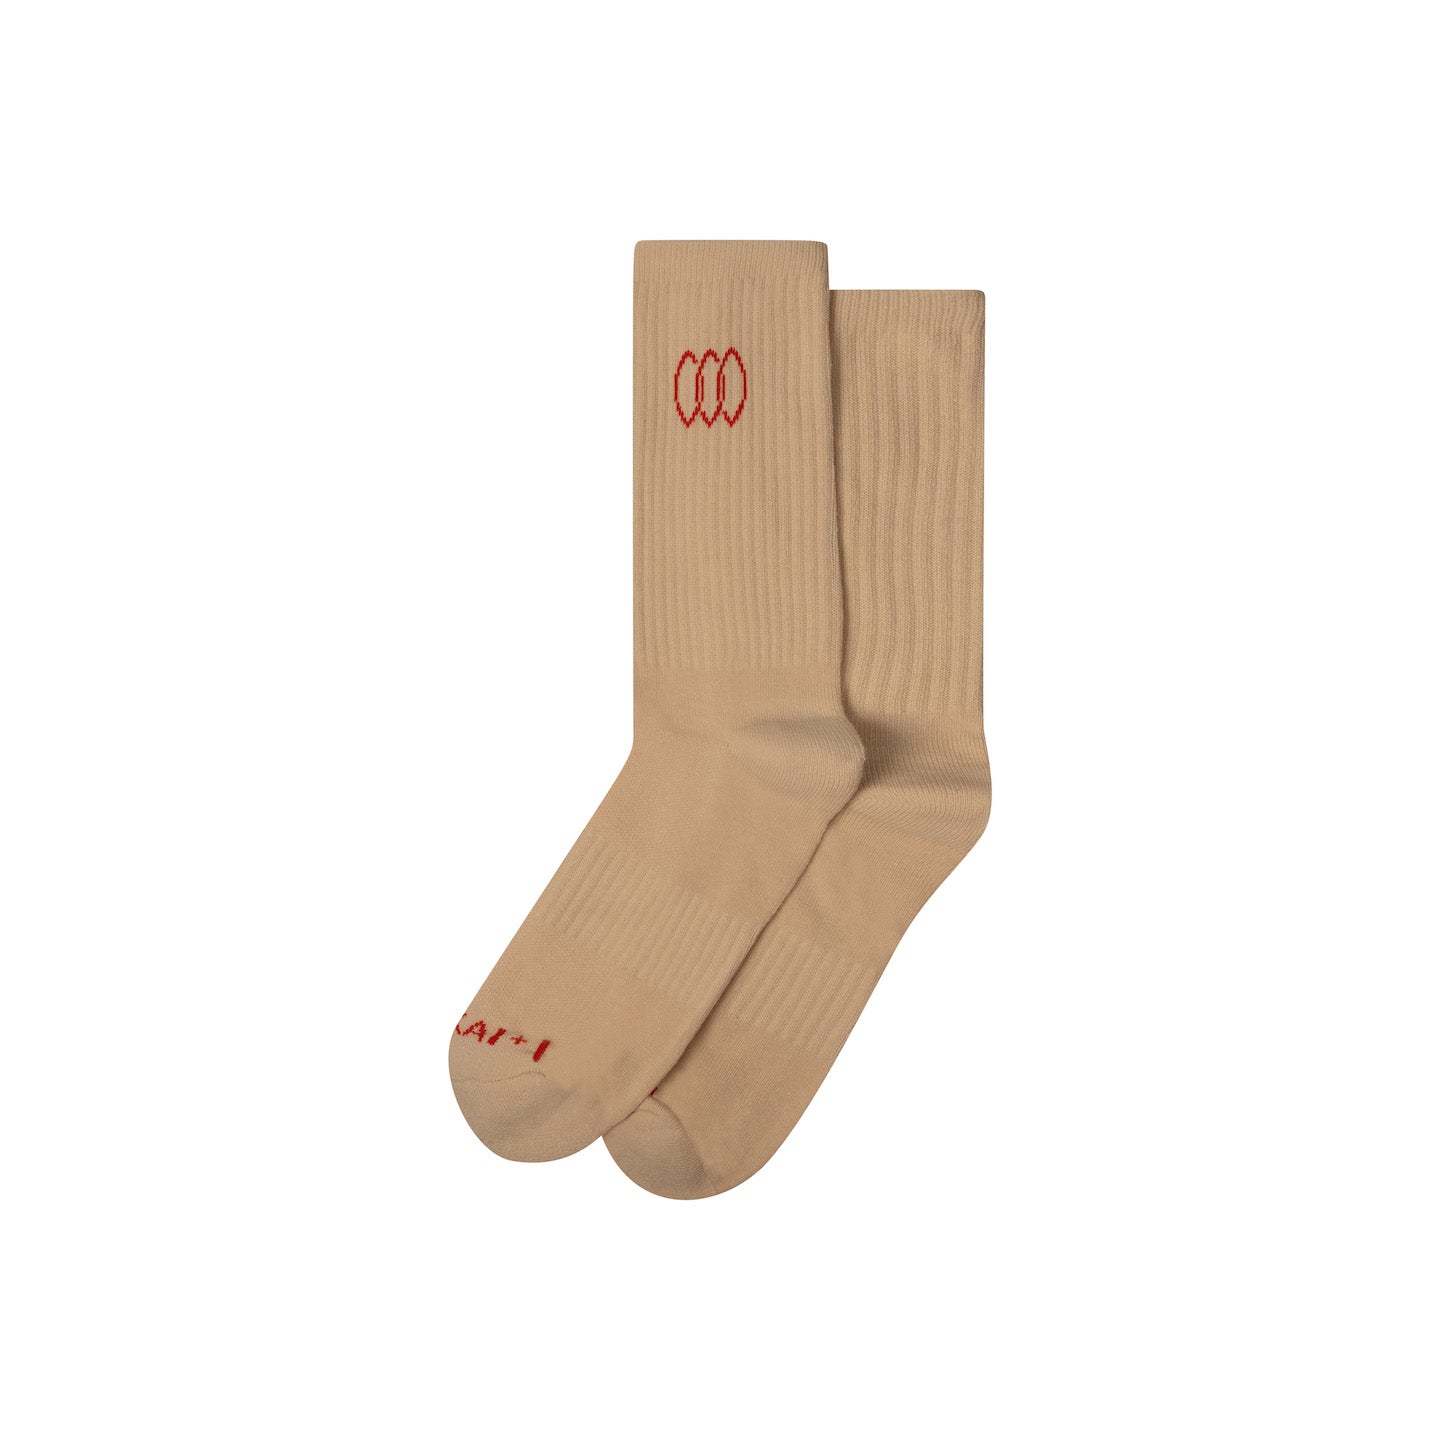 Three Leaf Cotton Socks in Taupe by Her Kai & I. It feaures our sage leaf print design in Red